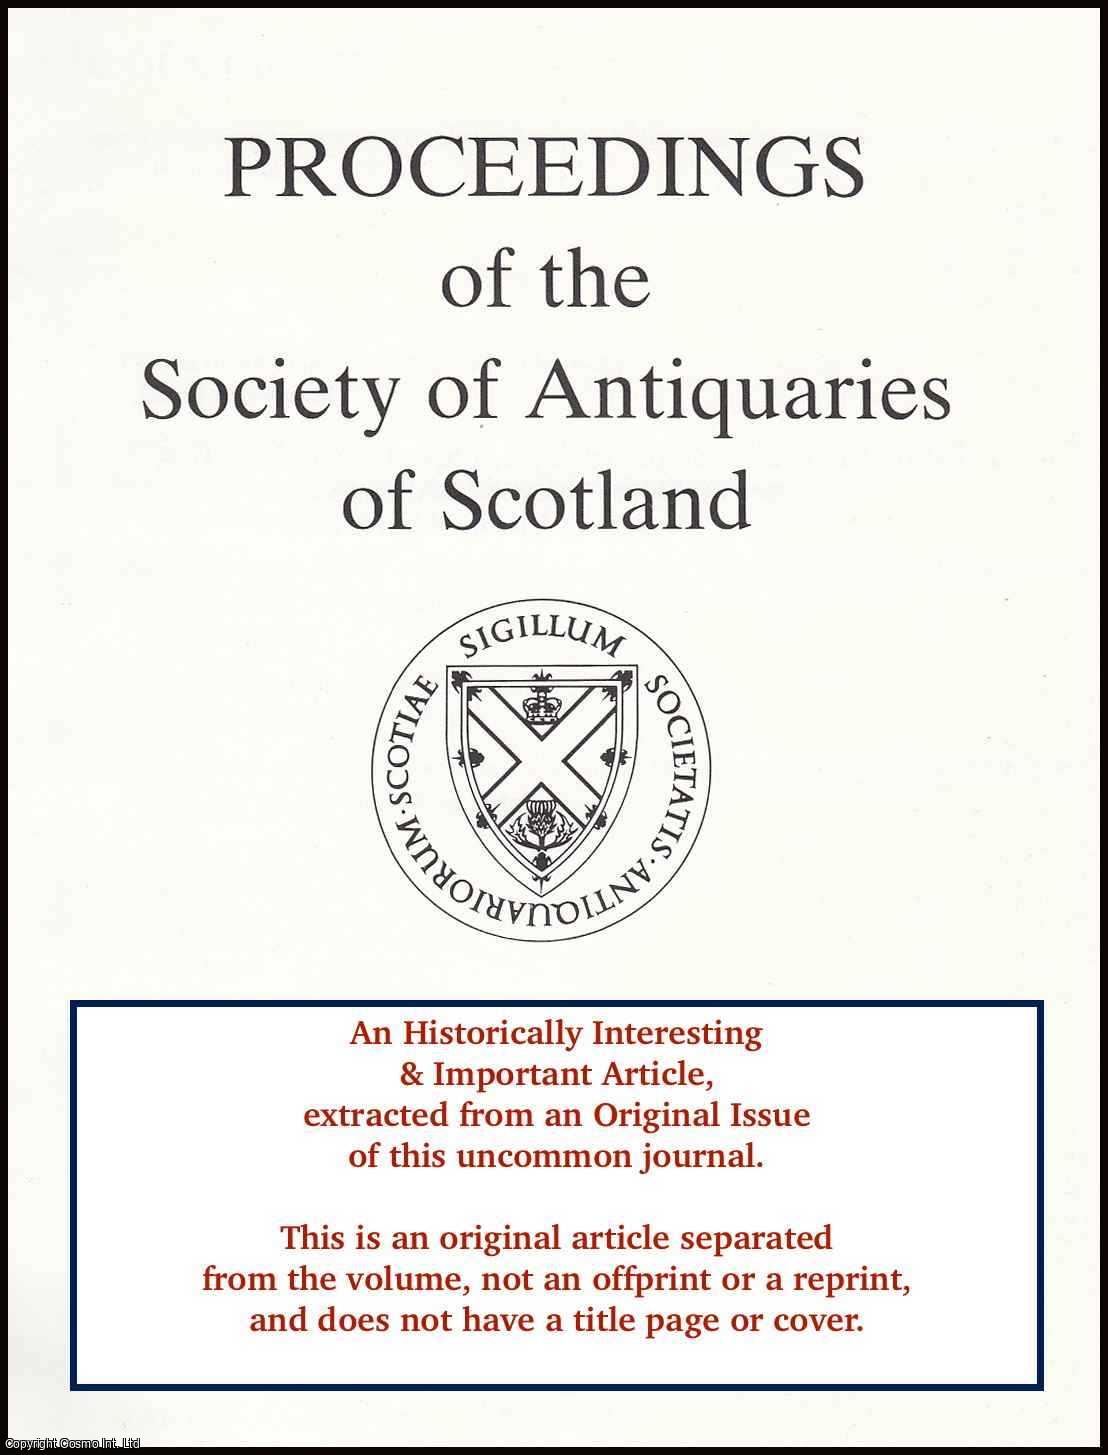 Stephen Carter & Magnar Dalland - Bronze Age Banks at The Black Crofts, North Connel, Argyll, A Synthesis and Re-Assessment. An original article from the Proceedings of the Society of Antiquaries of Scotland, 2005.